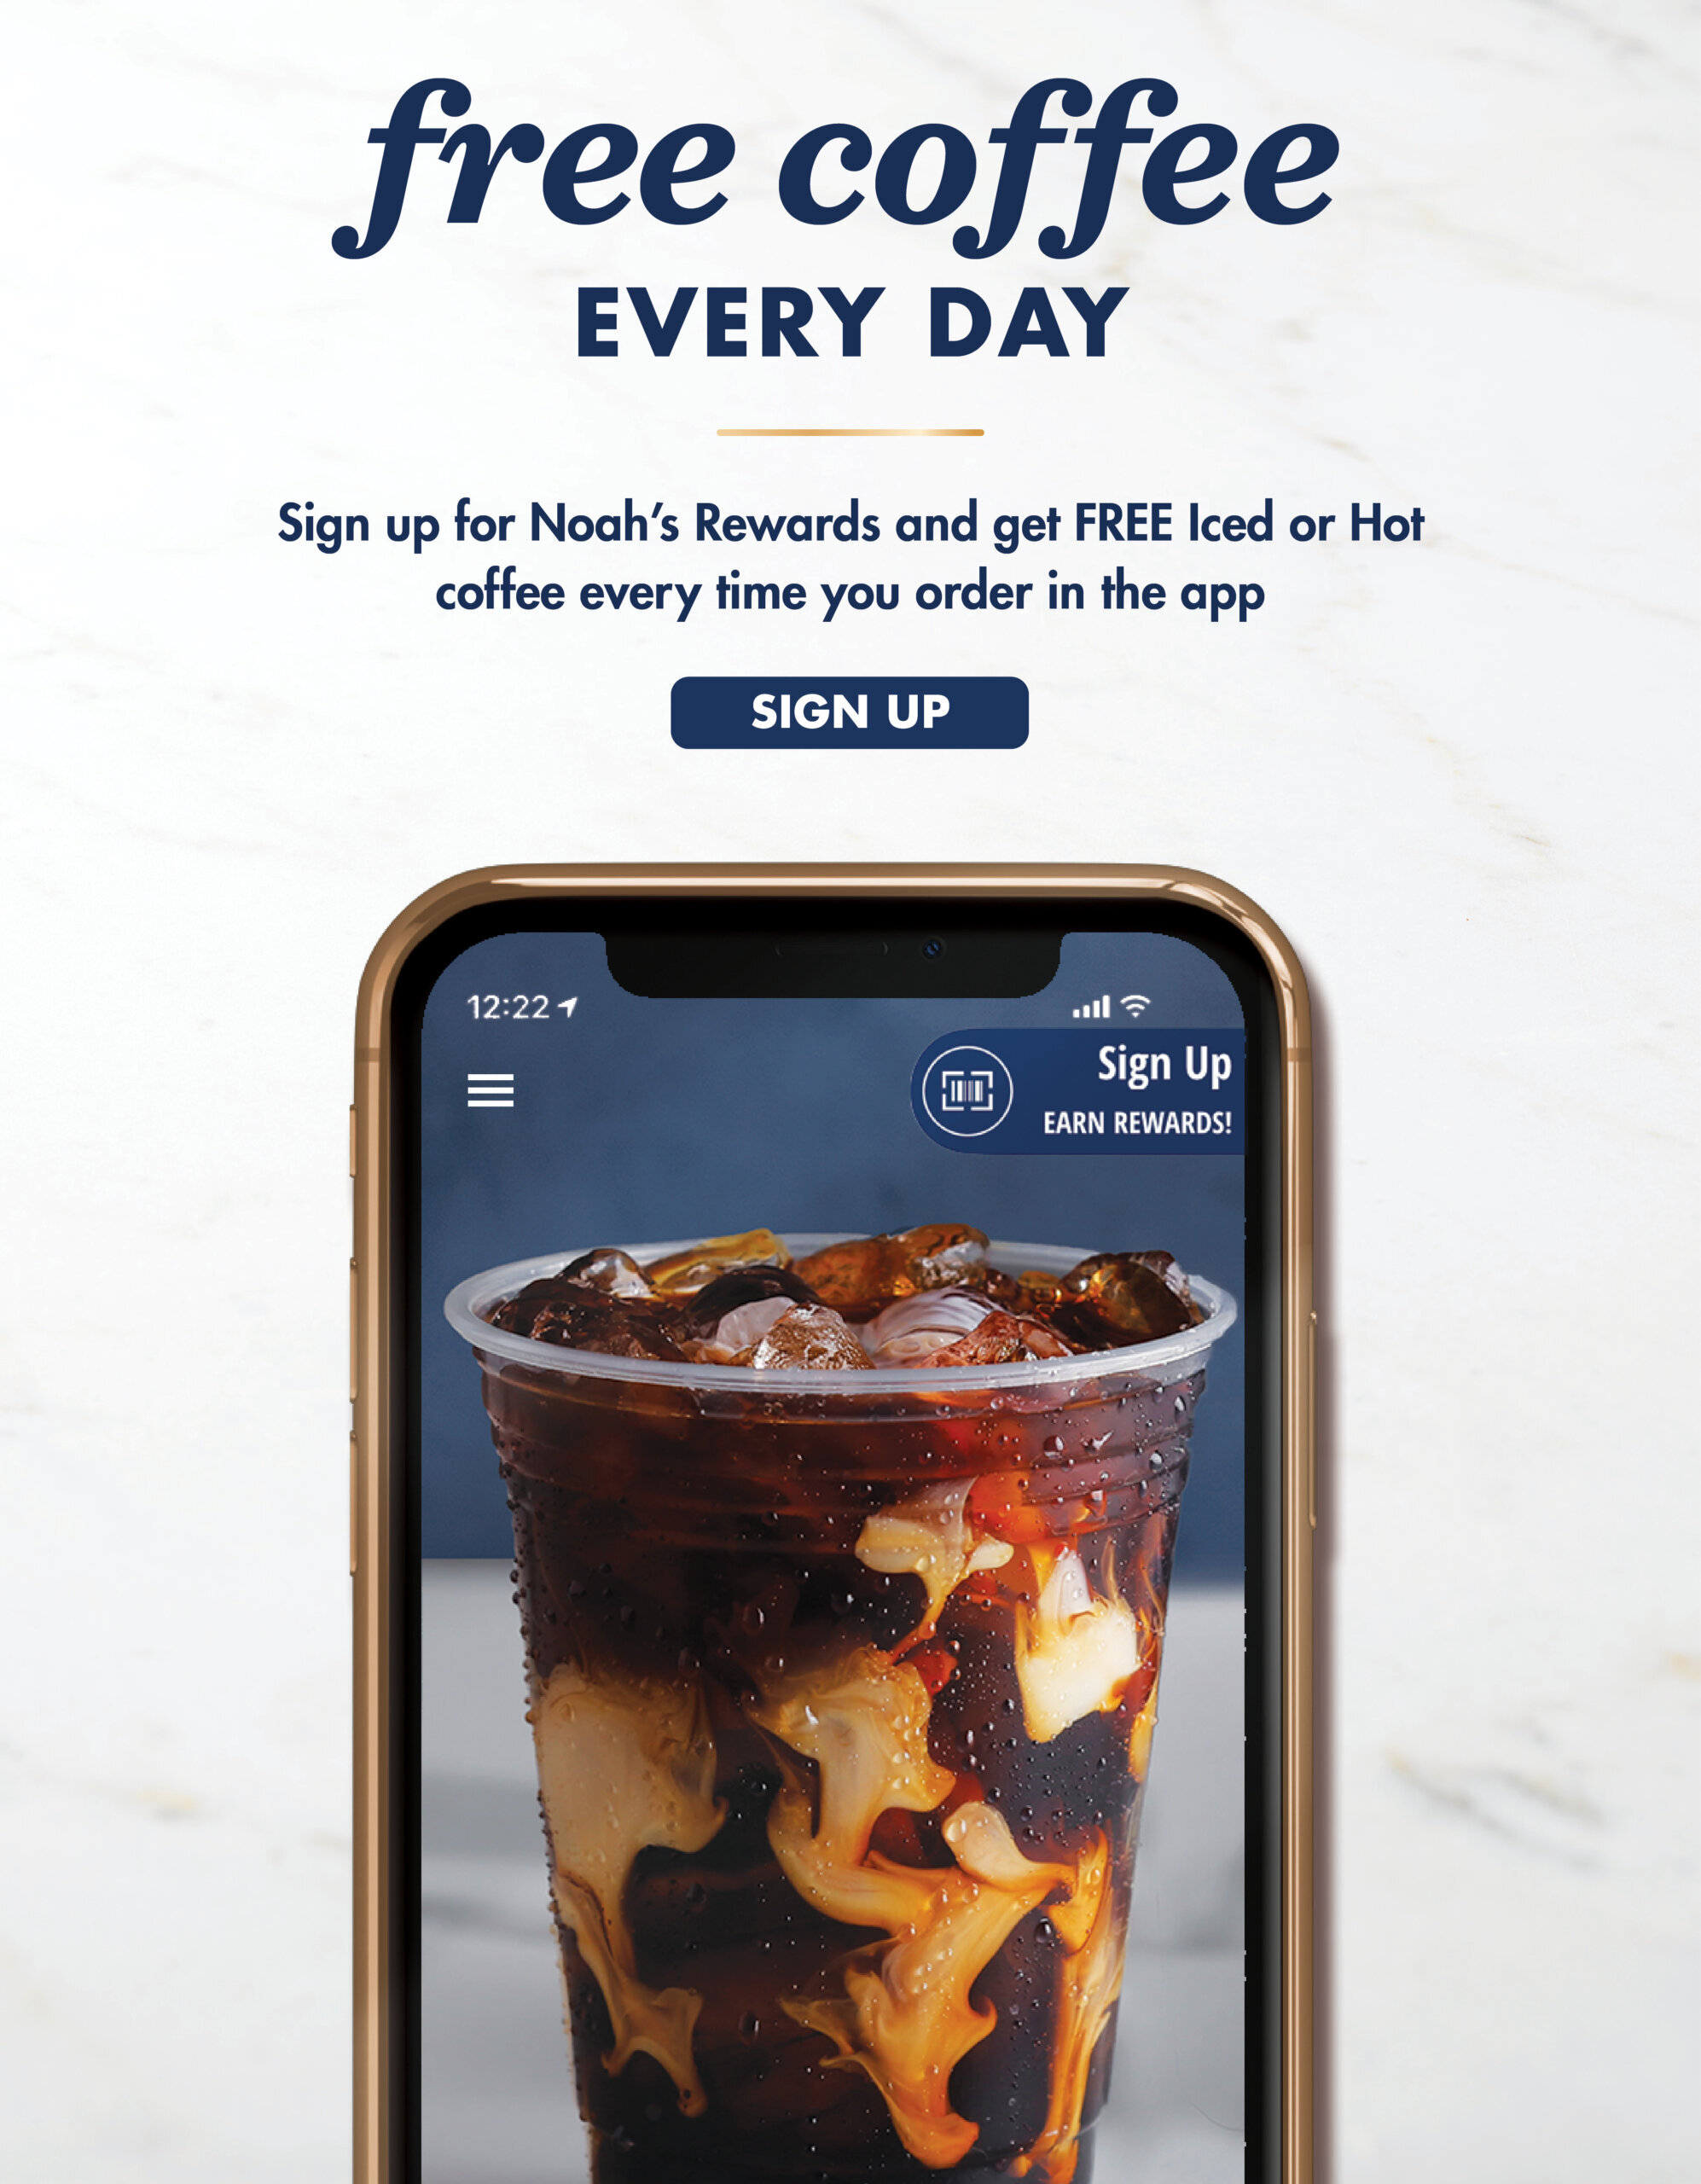 Free coffee every day. Tap to sign up for Noah's Rewards and get free iced or hot coffee every time you order in the app.